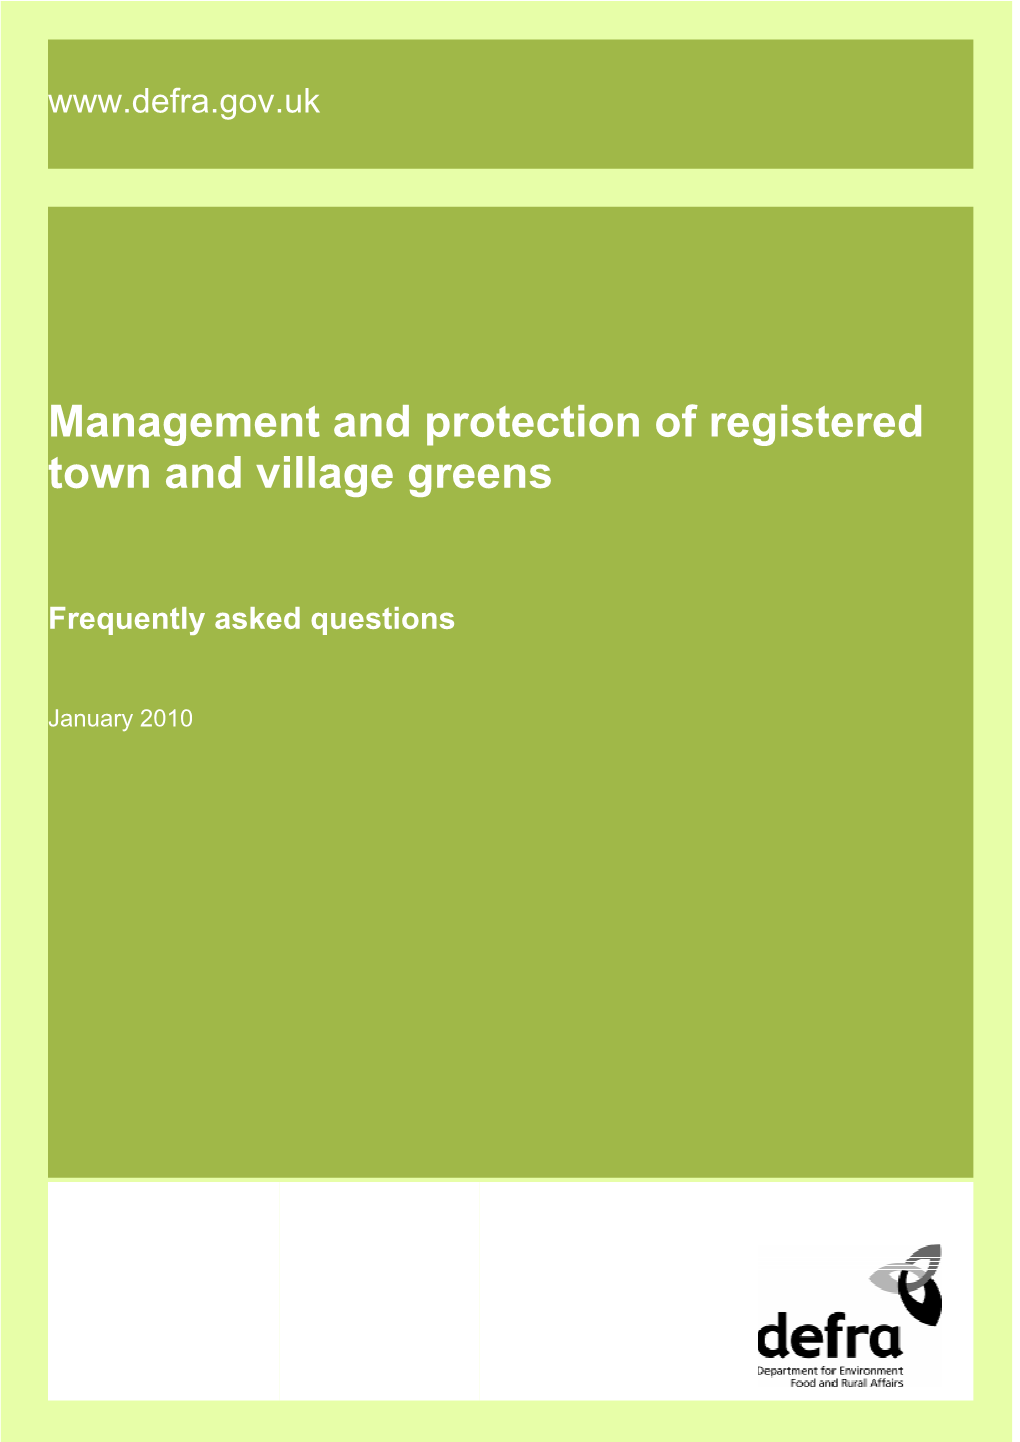 Management and Protection of Registered Town and Village Greens